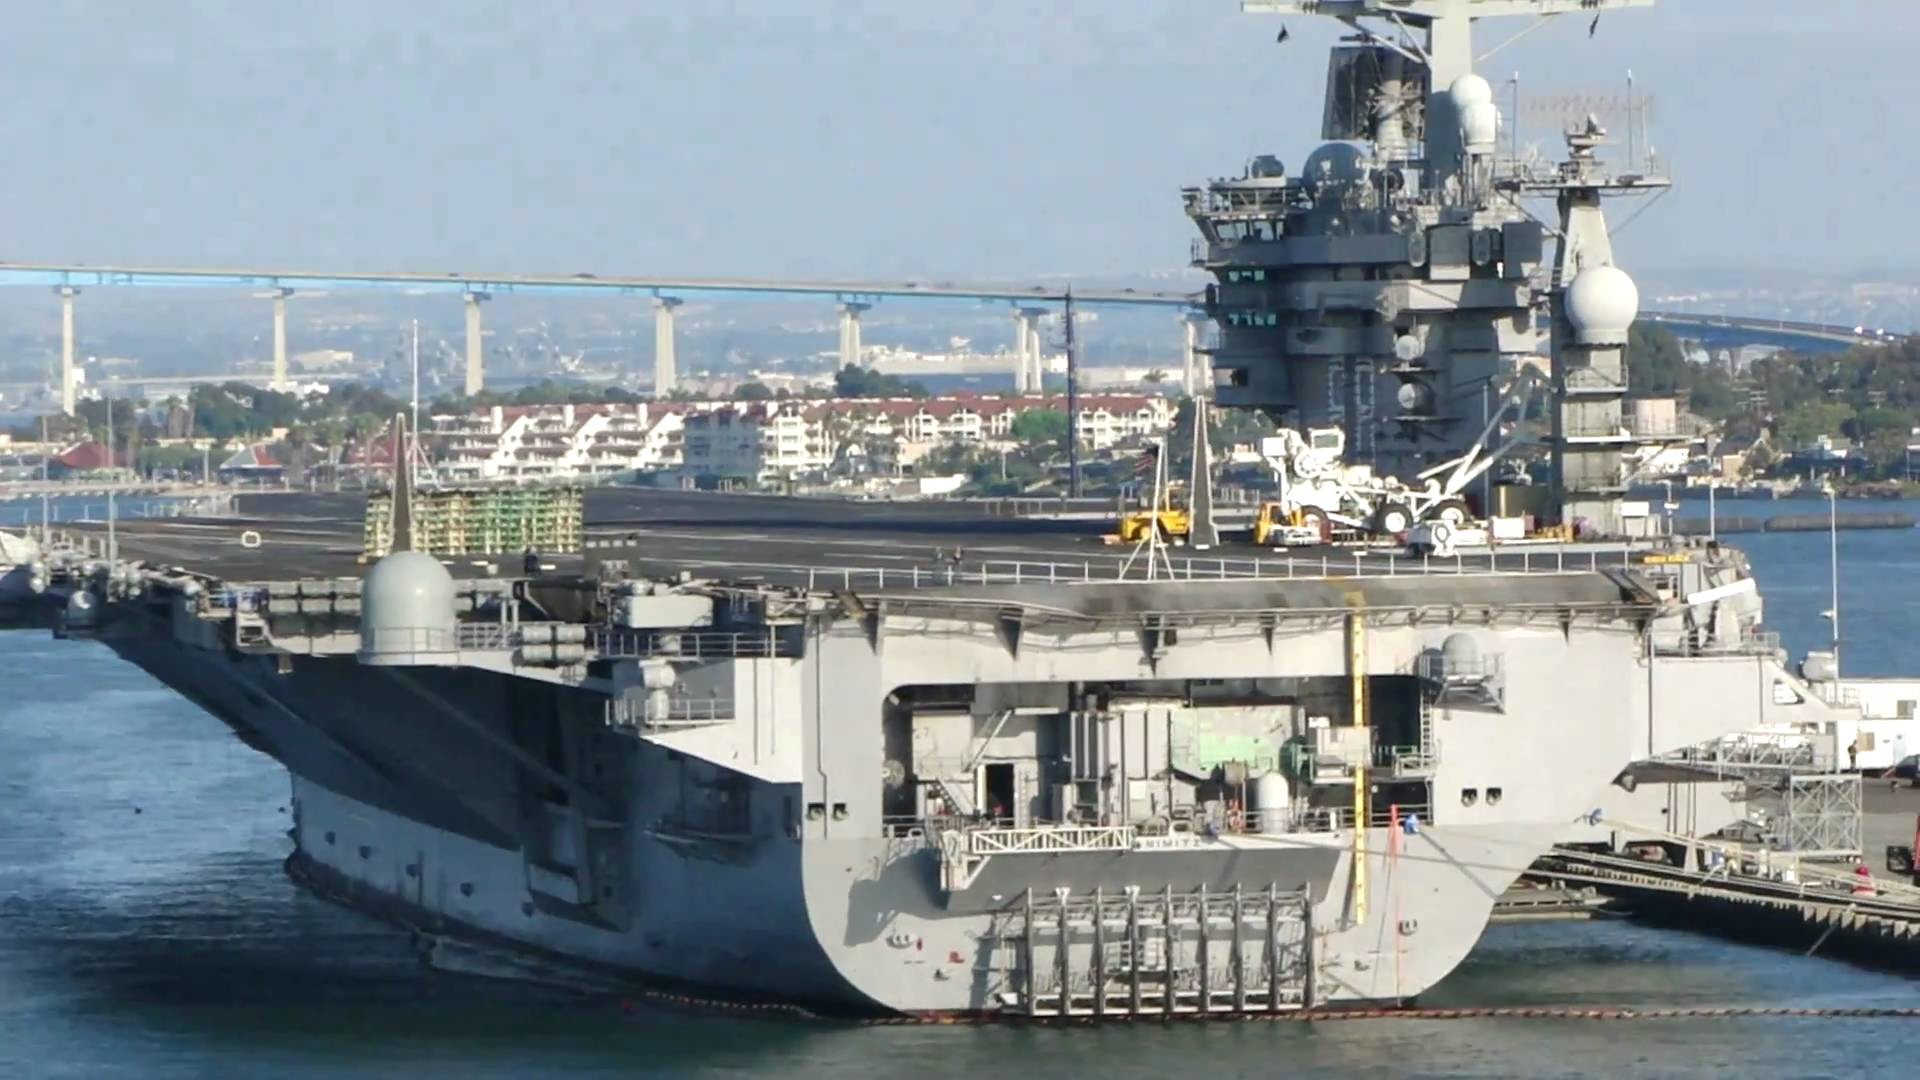 1920x1080 July 23, 2010 - USS Abraham Lincoln passes USS Nimitz while pulling out of  San Diego for COMPTUEX - YouTube